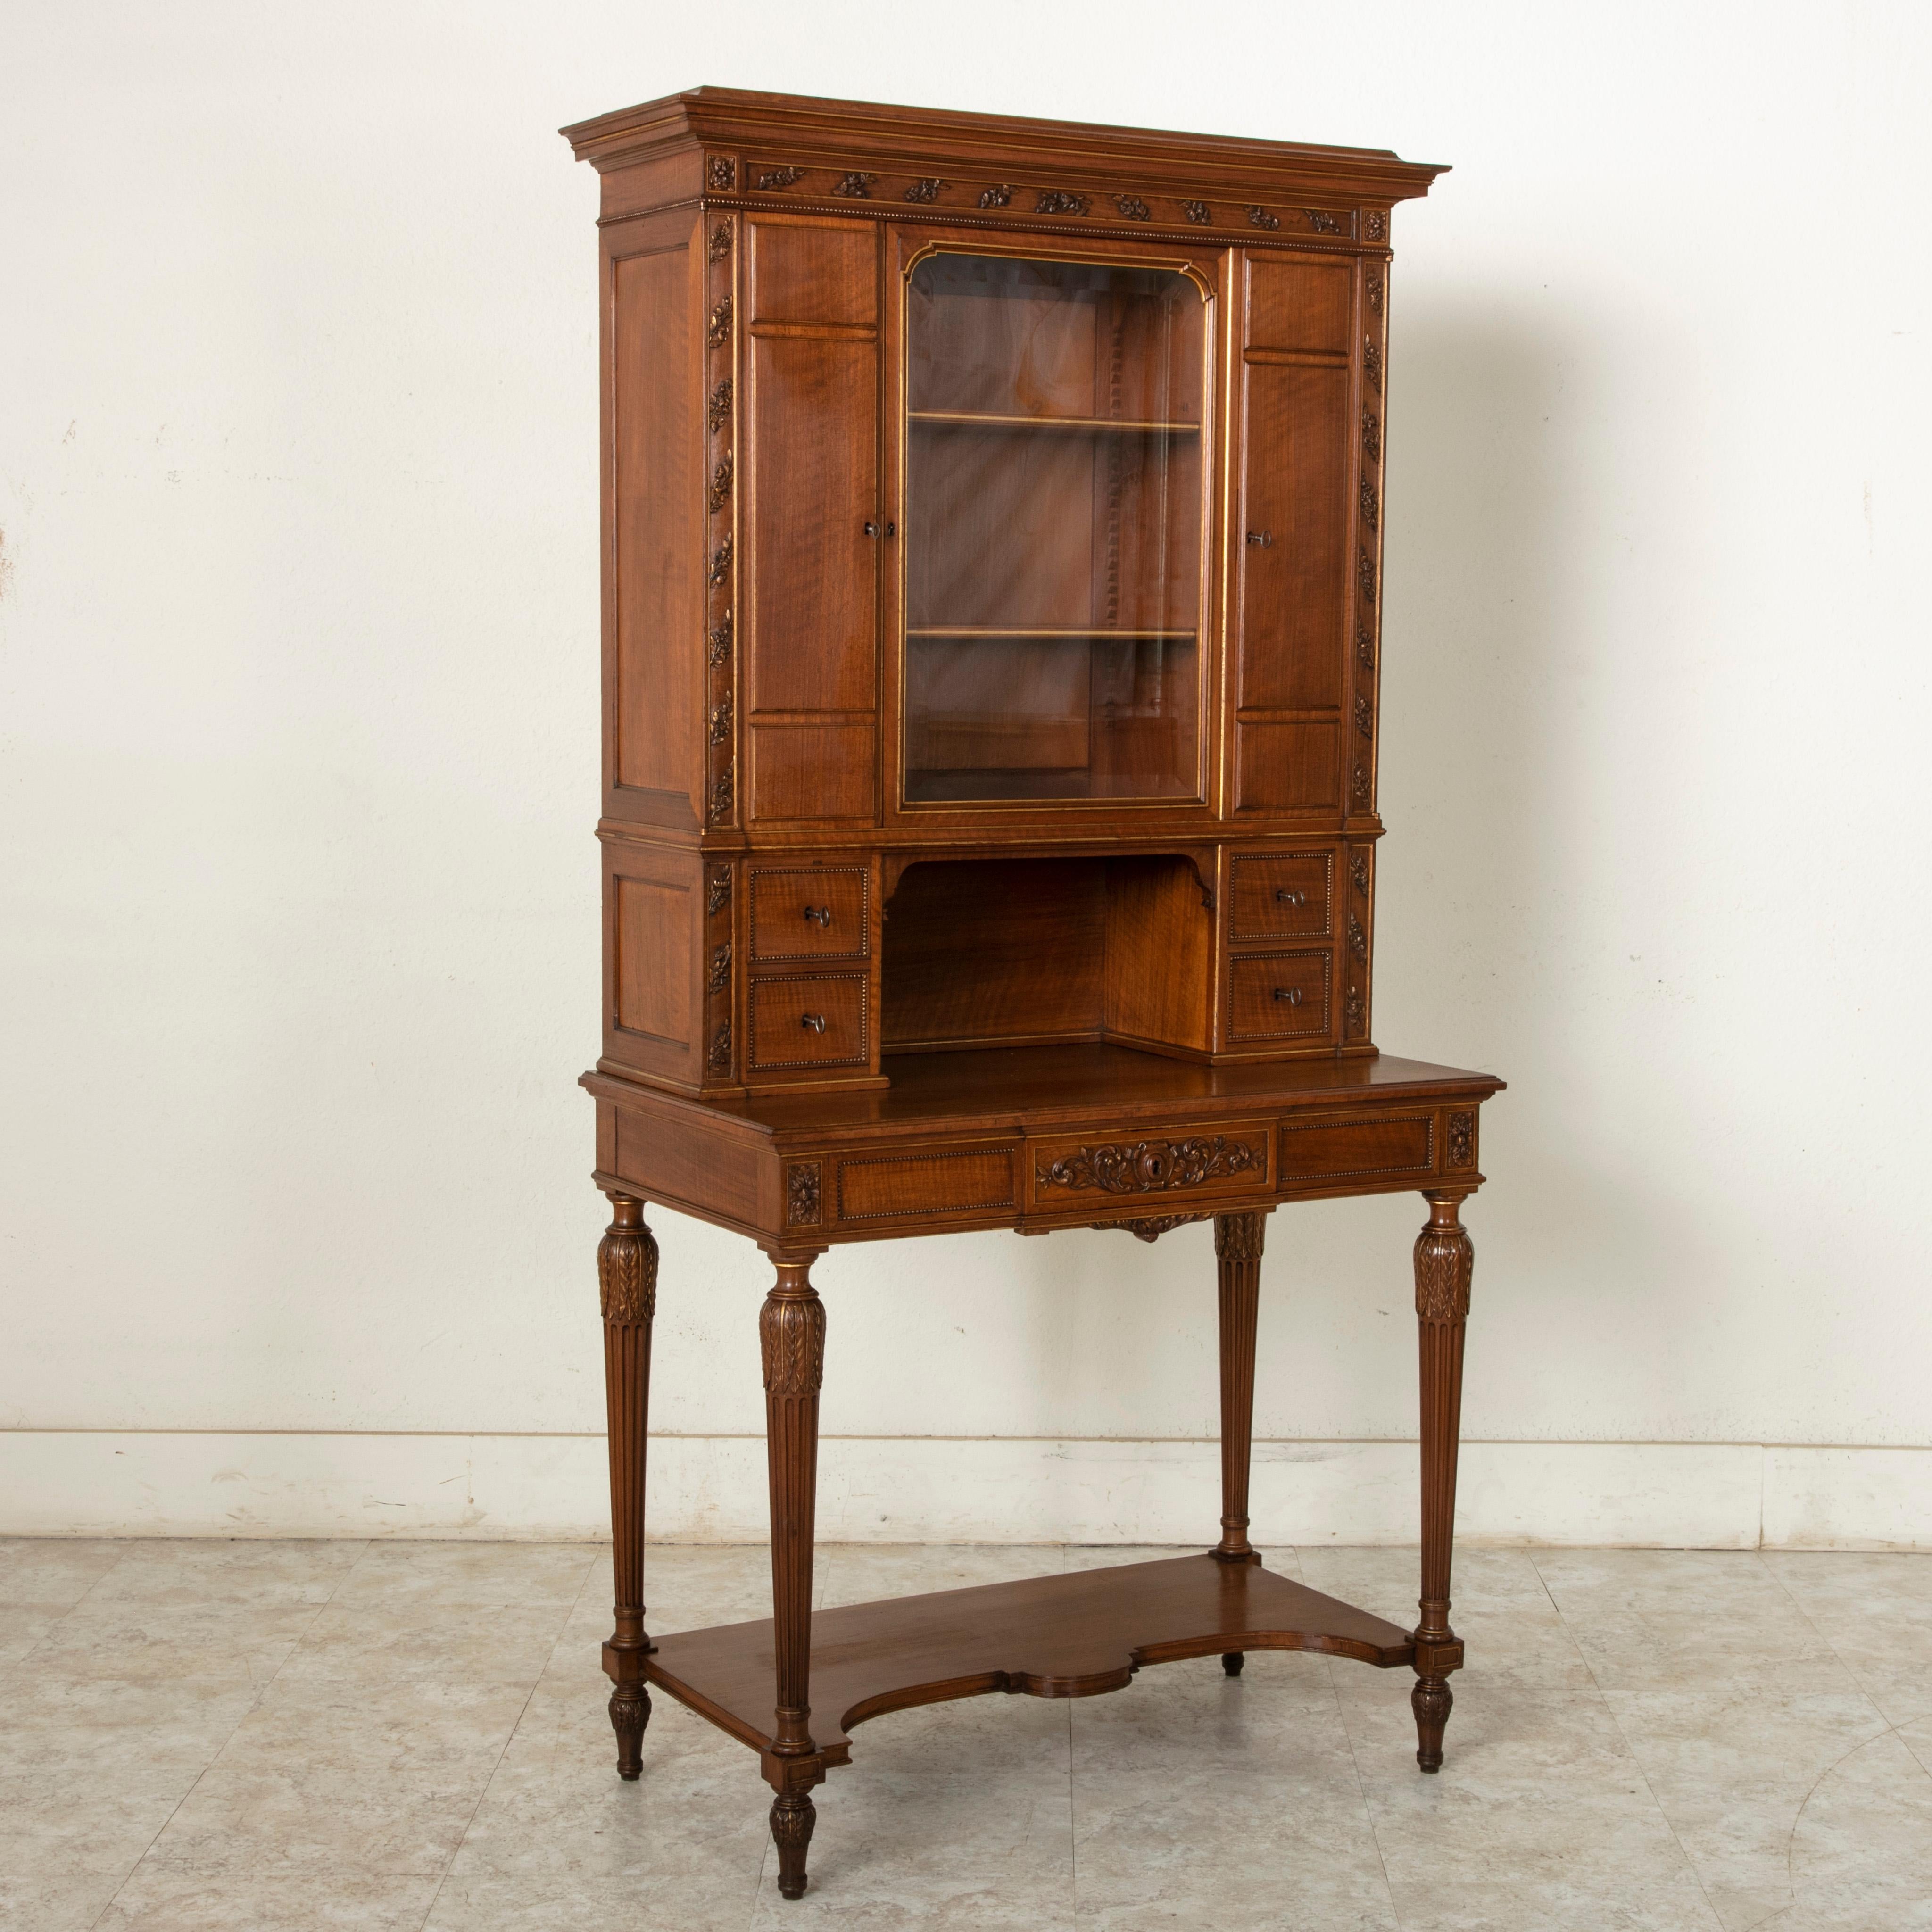 Referred to as a Bonheur Du Jour, or 'daytime delight', this early 20th century walnut secretary writing desk with gold detailing is from the city of Lyon, France. Its lower writing table surface features rosettes at the corners and tapered fluted